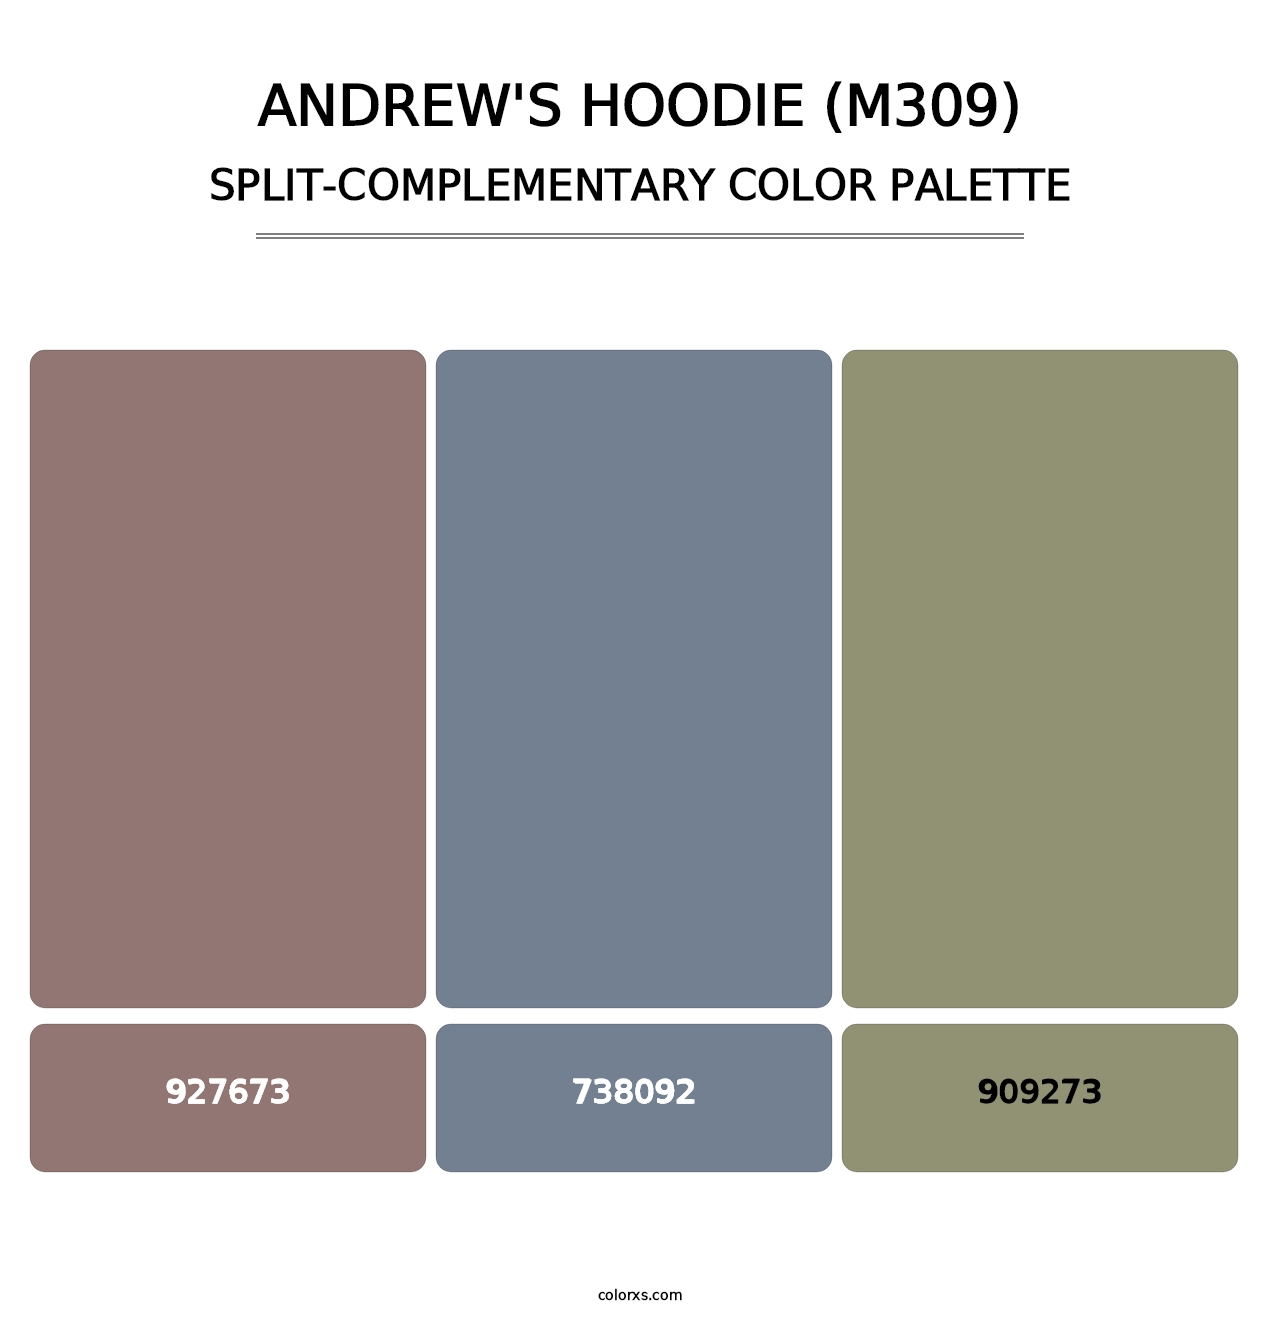 Andrew's Hoodie (M309) - Split-Complementary Color Palette